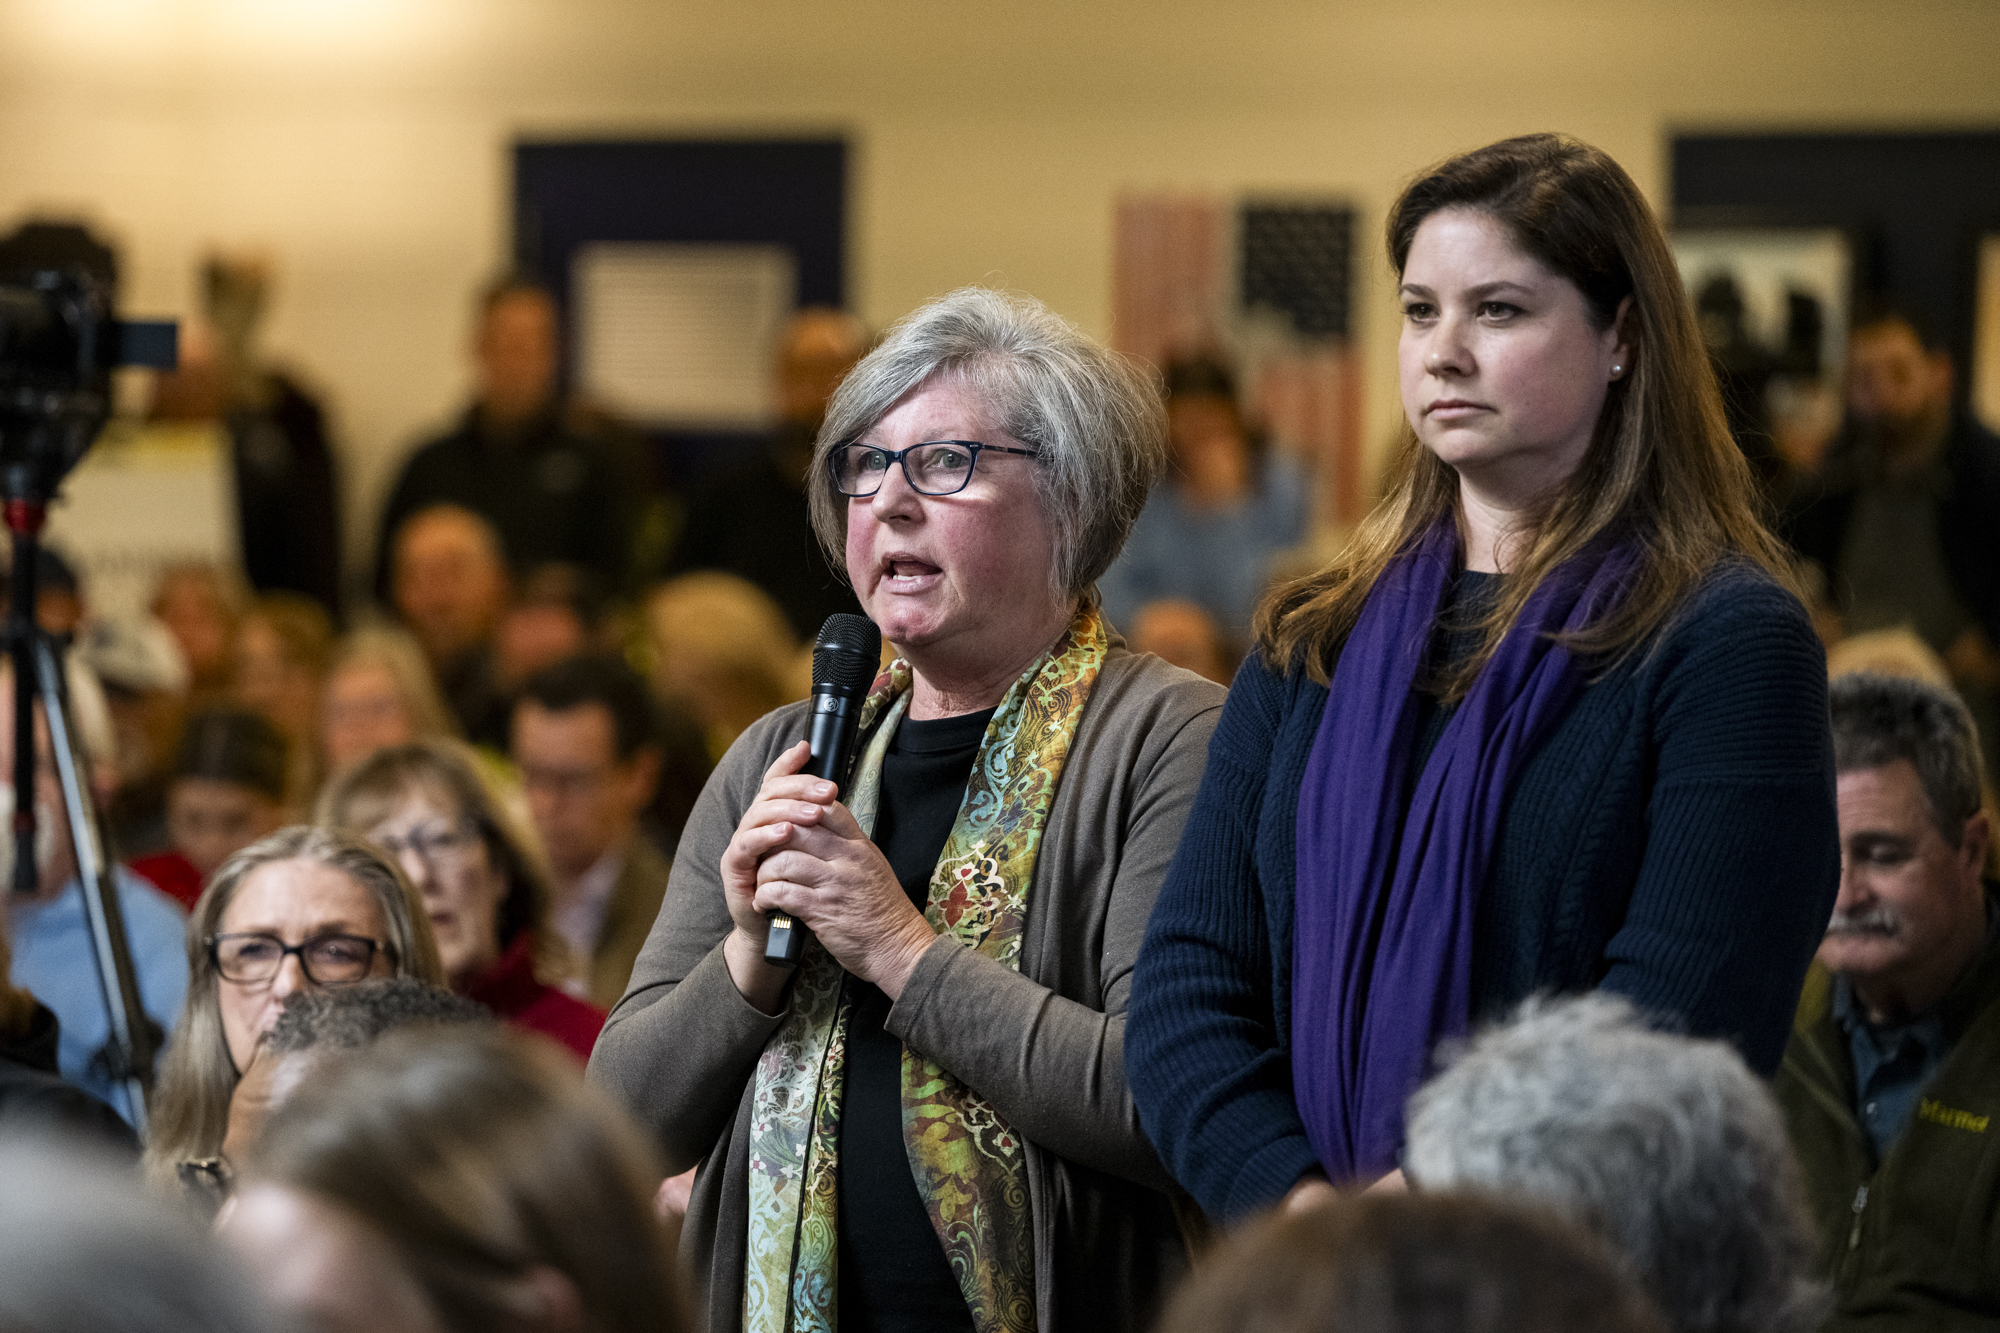 An older white woman and a younger white woman to her left during a town hall, the older woman is speaking into a microphone.